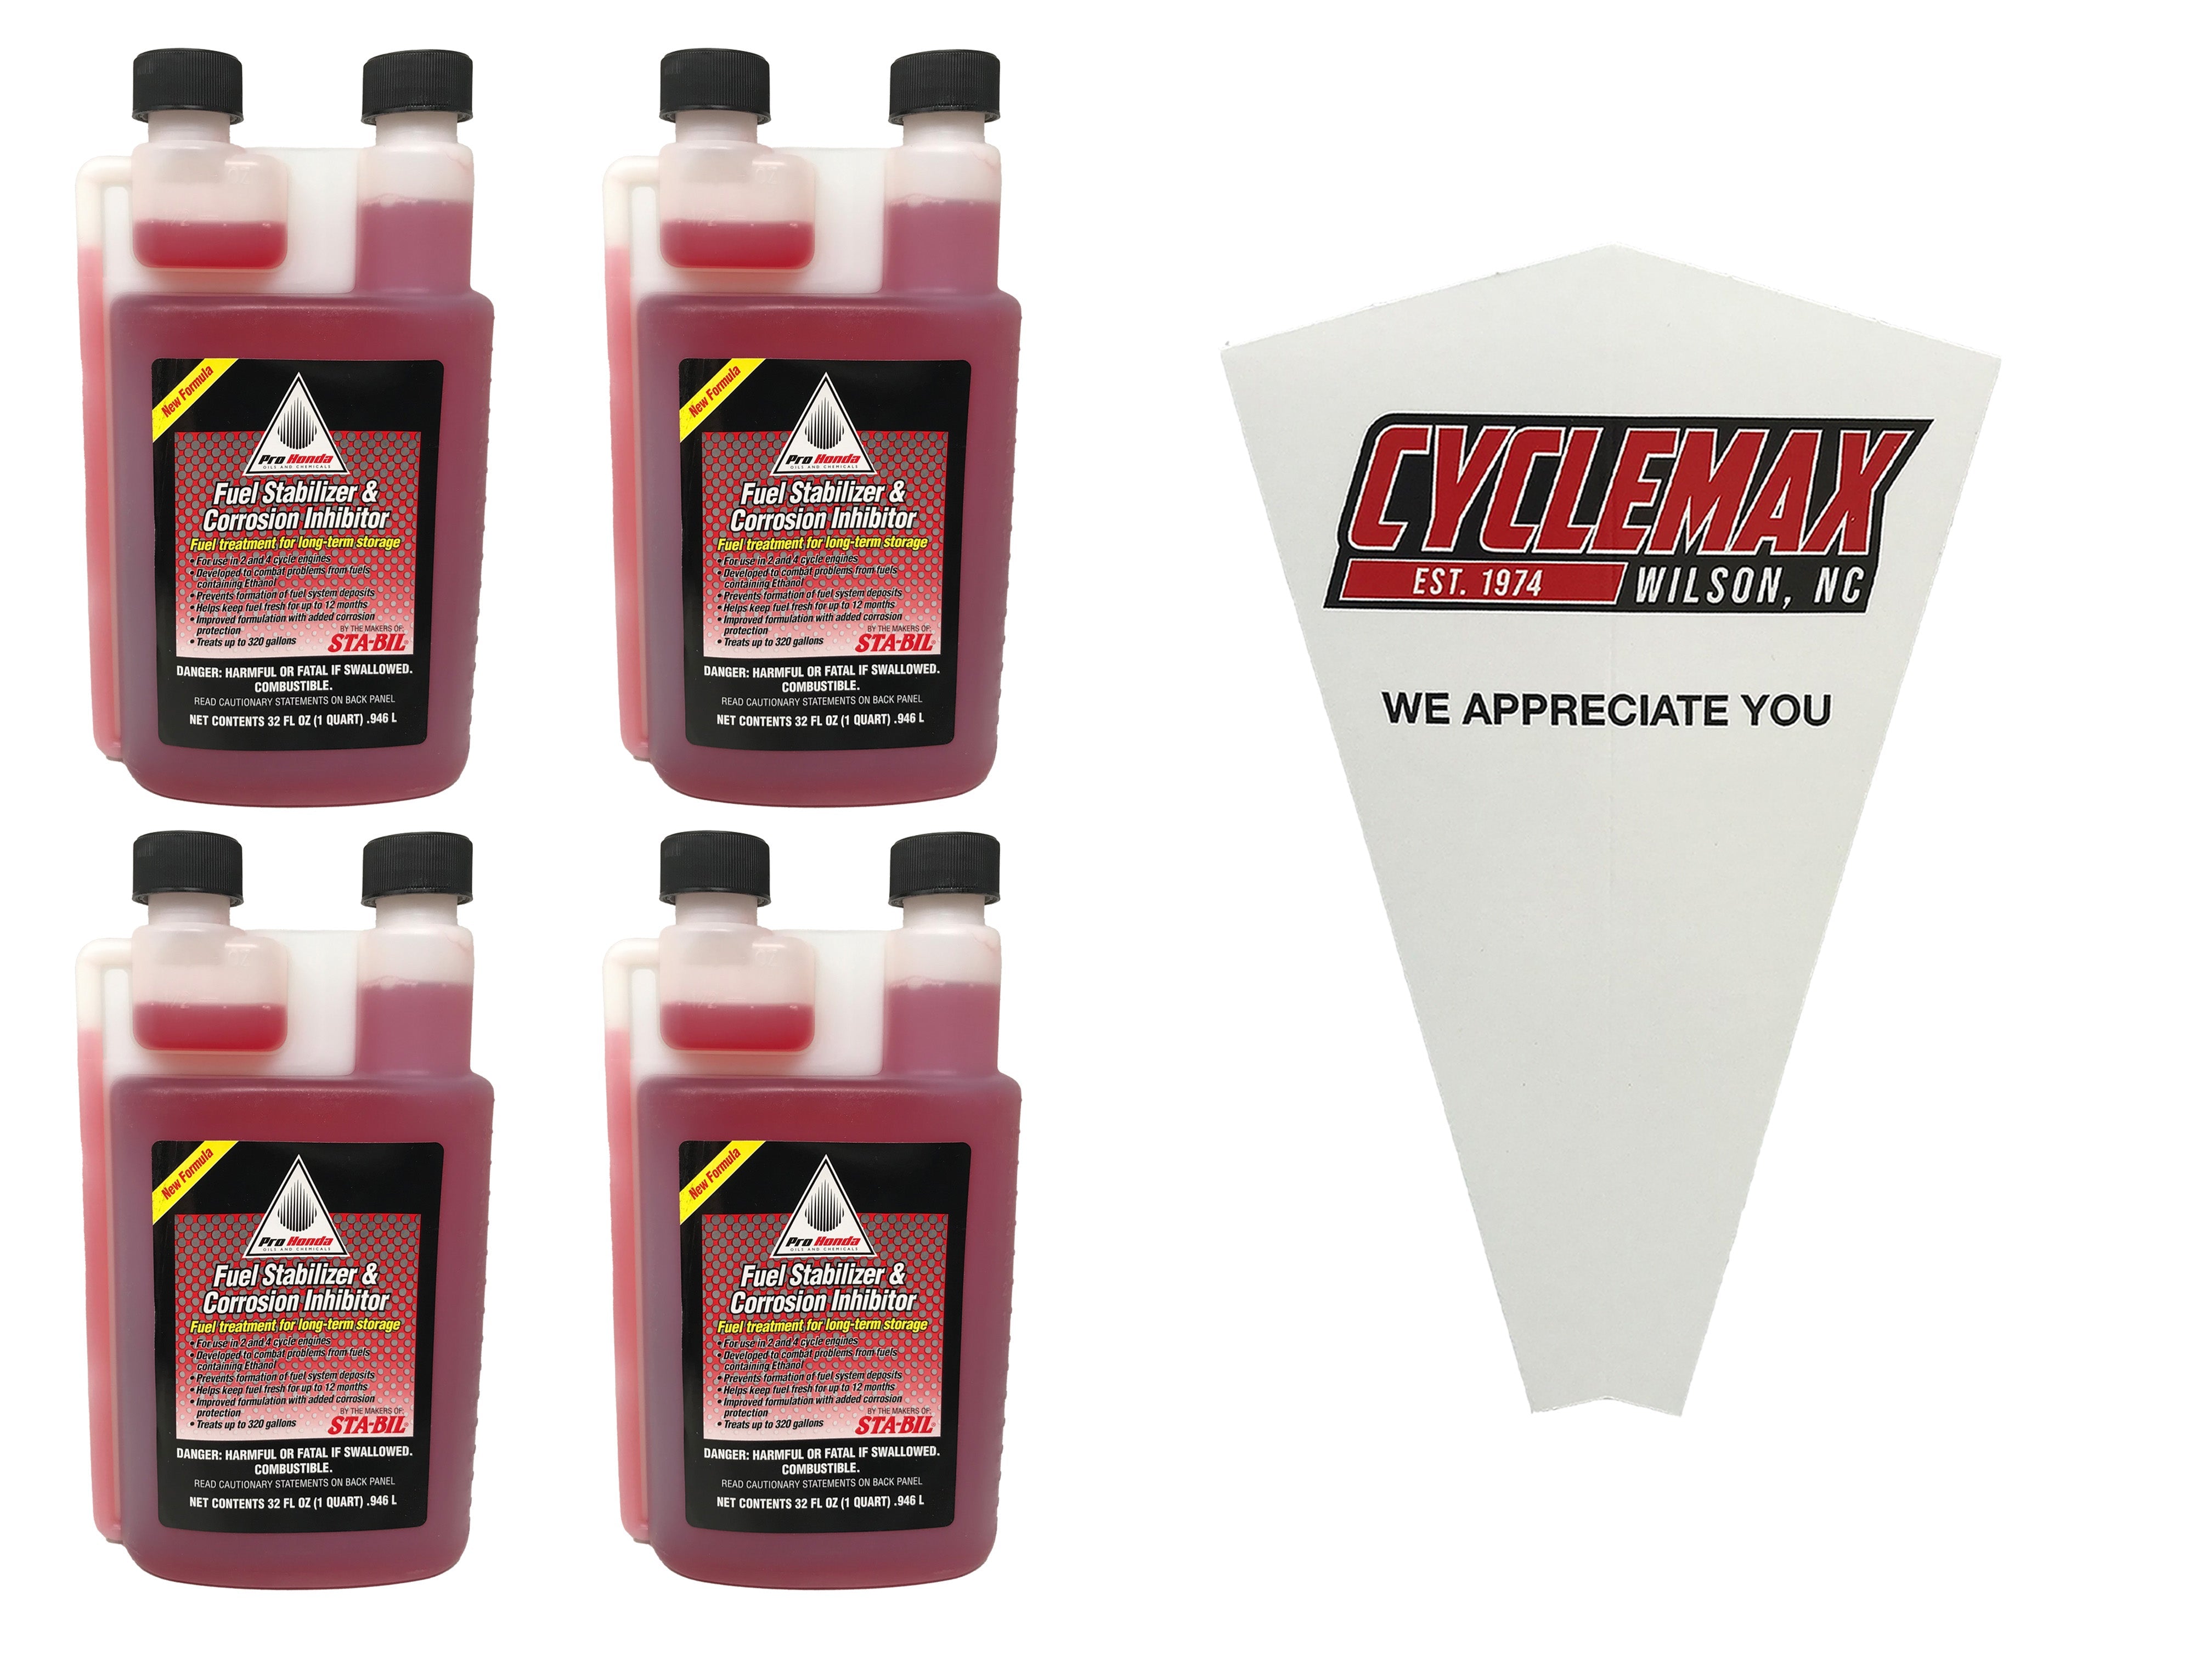 CYCLEMAX Four Pack for Honda Fuel Stabilizer & Corrosion Inhibitor 08732-3200 Contains Four 32oz Bottles and a Funnel